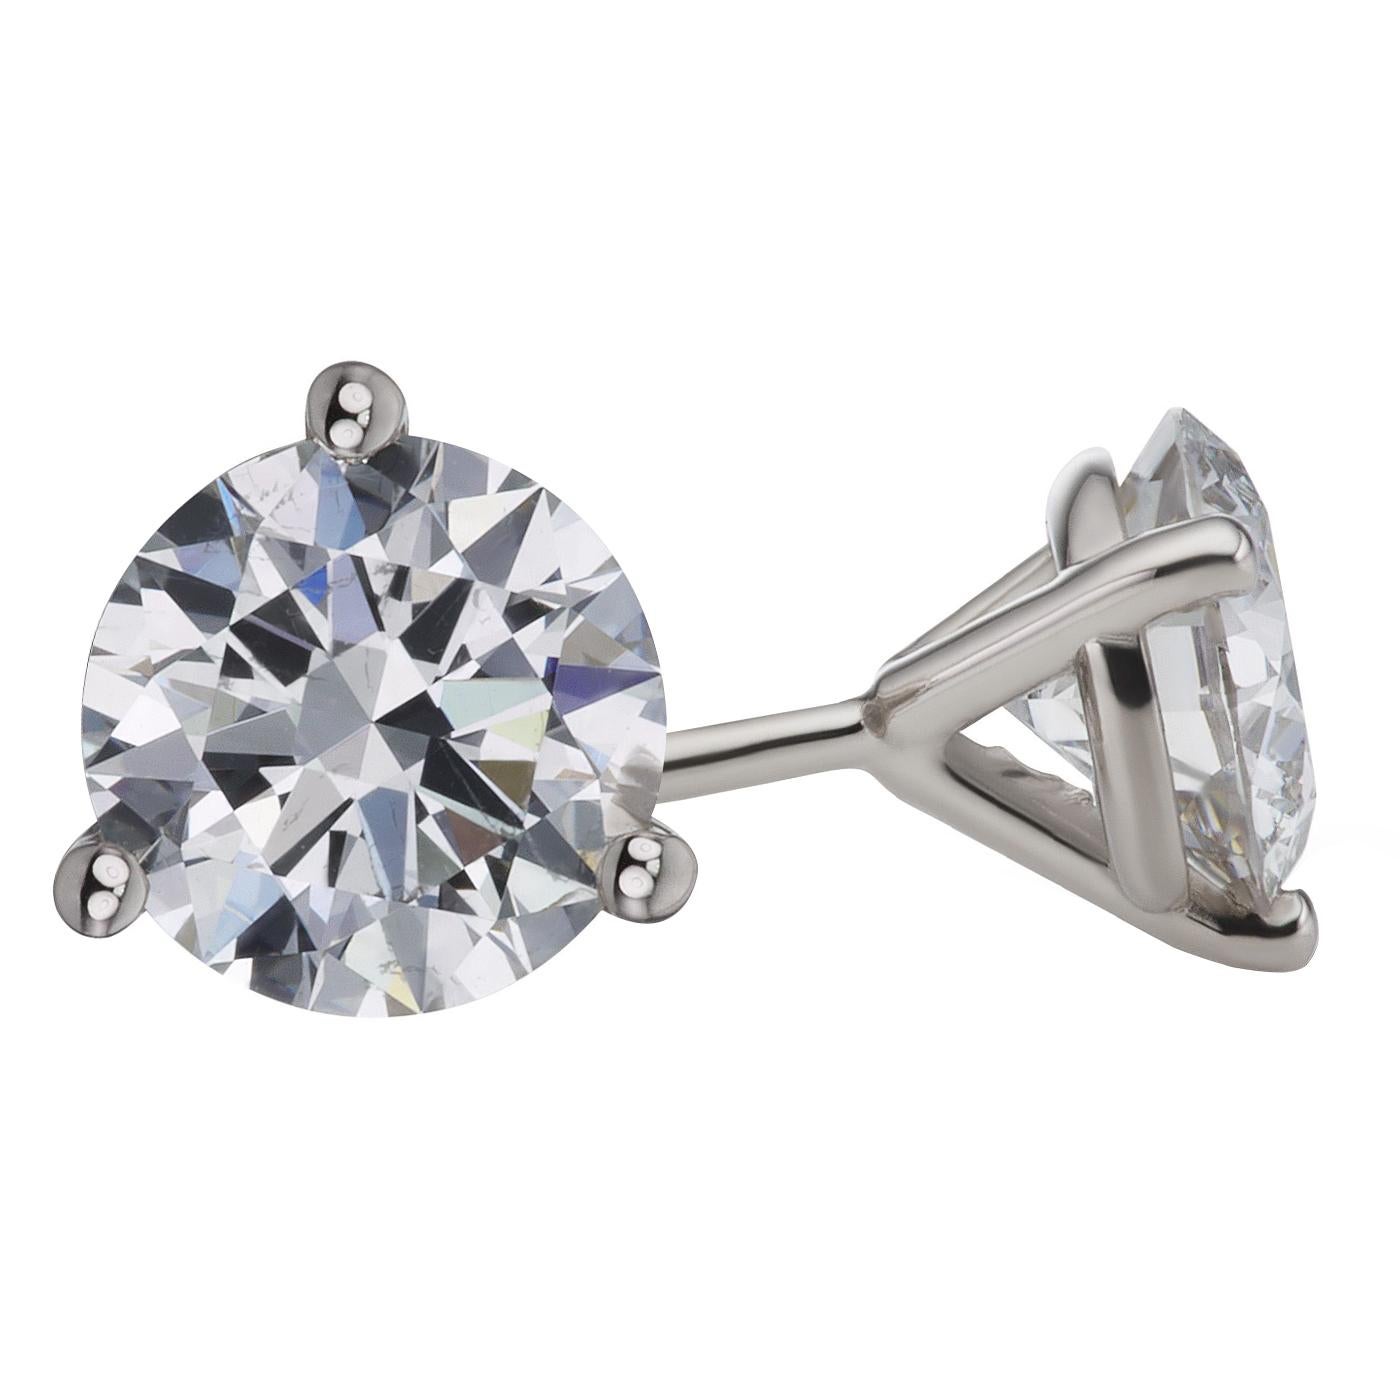 Round Cut 3.01ct GIA Natural Round Diamond Stud Earrings 3-Prong Martini Setting 14K Gold For Sale